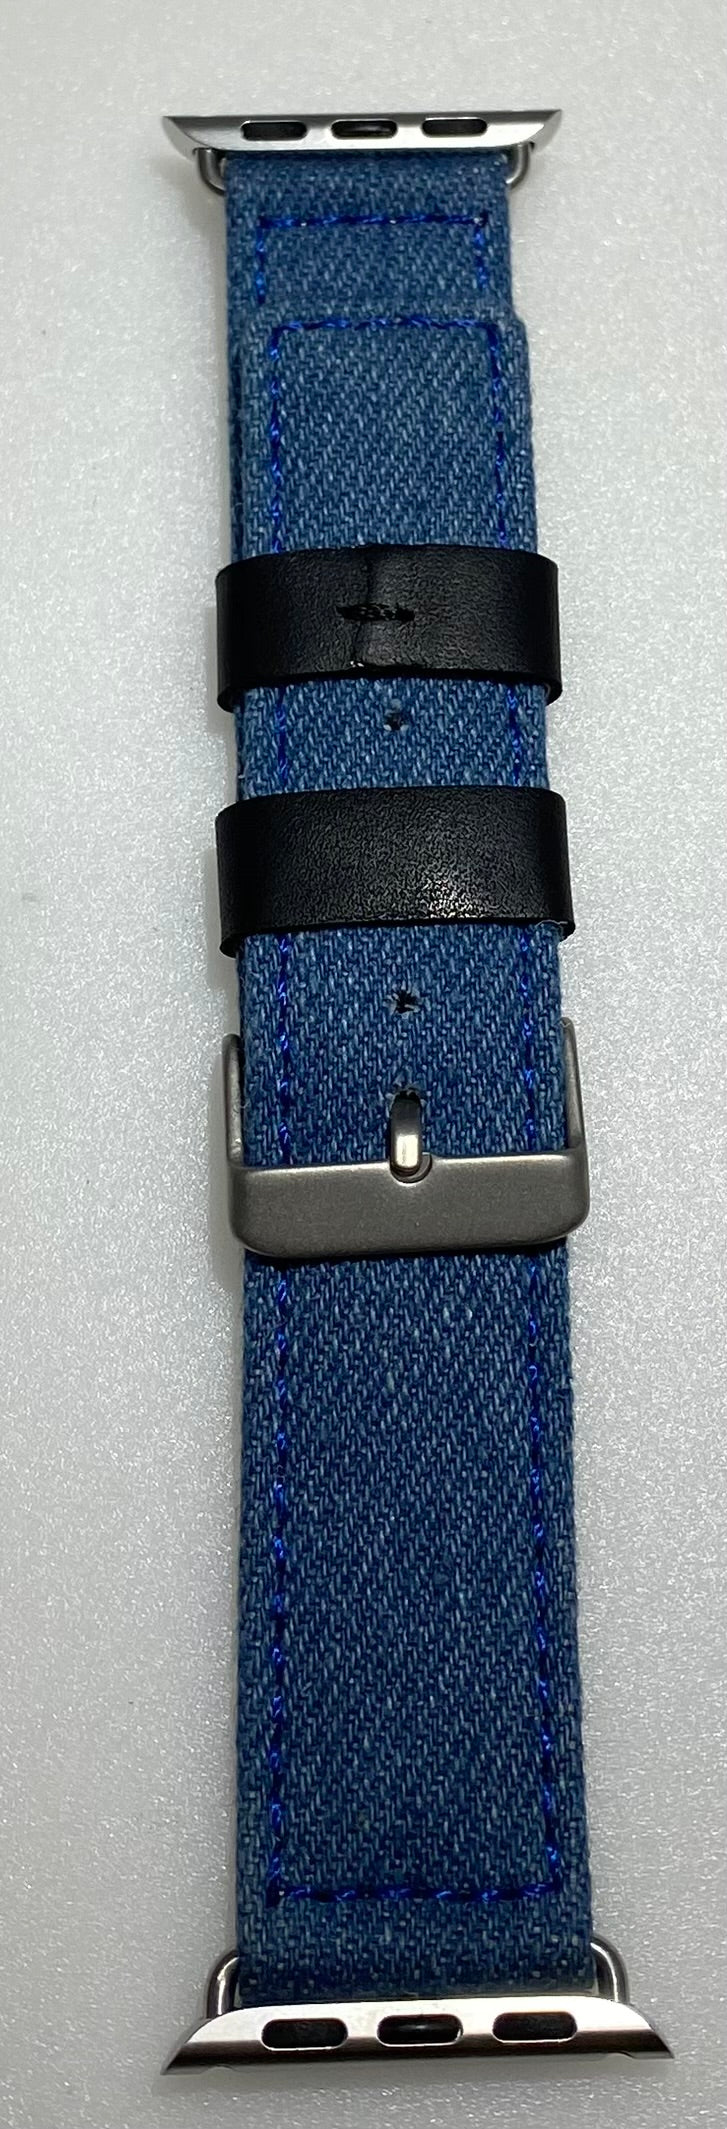 Apple iWatch Bands Fashion Watchband Canvas Jeans & Leathers Strap